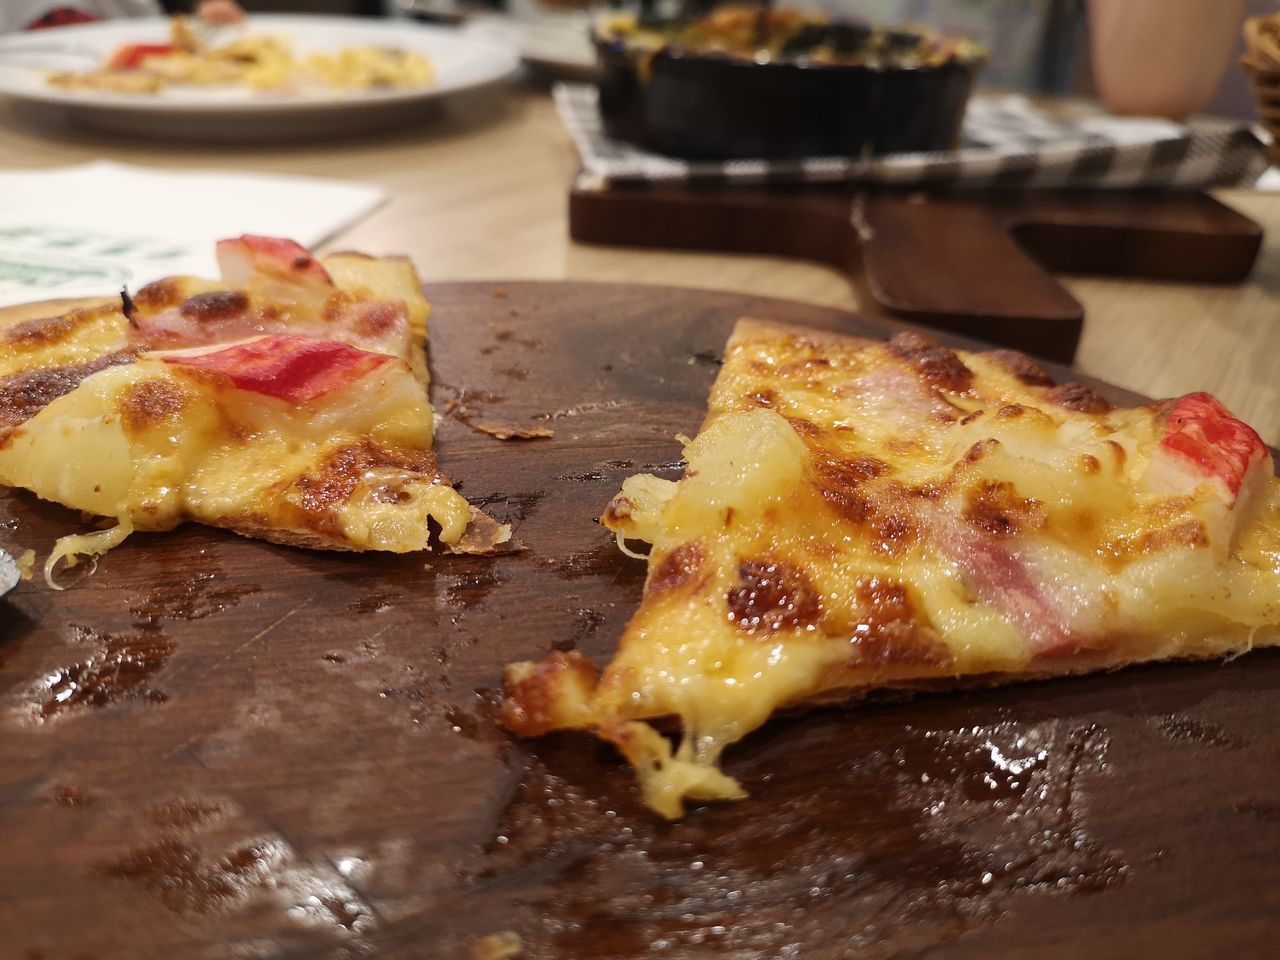 CLOSE-UP OF PIZZA ON PLATE